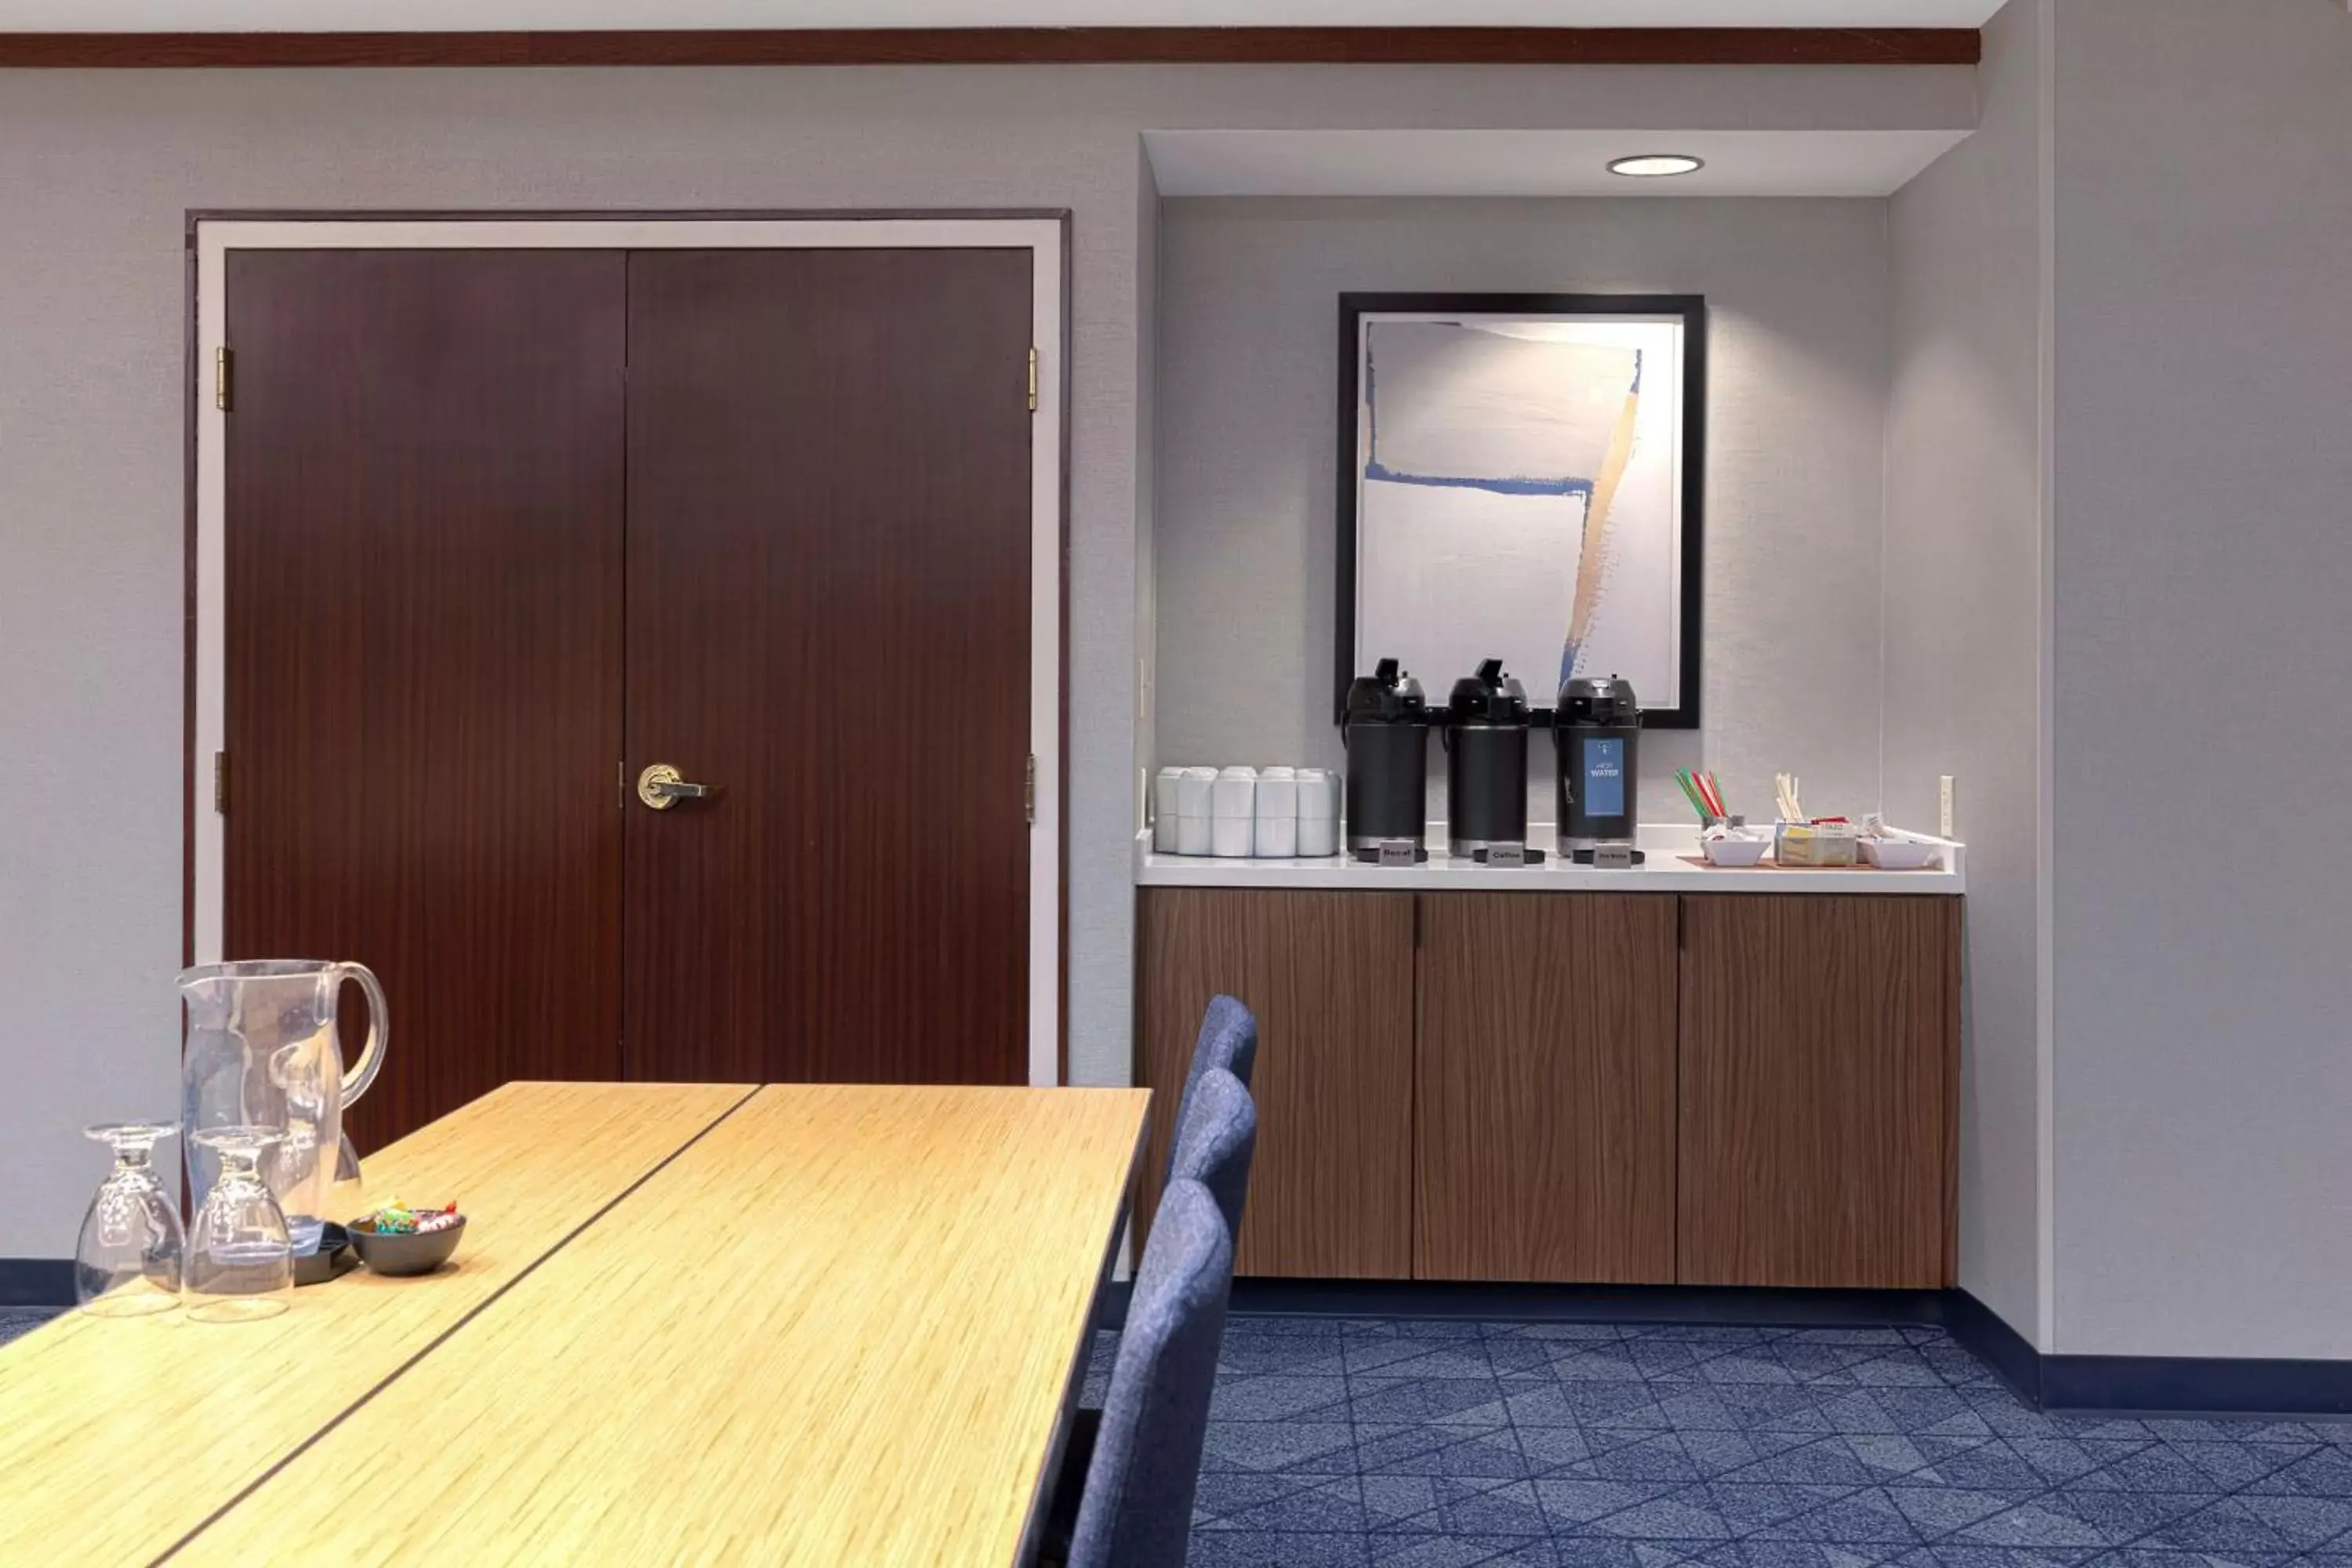 Meeting/conference room in Courtyard by Marriott Portland Southeast/Clackamas